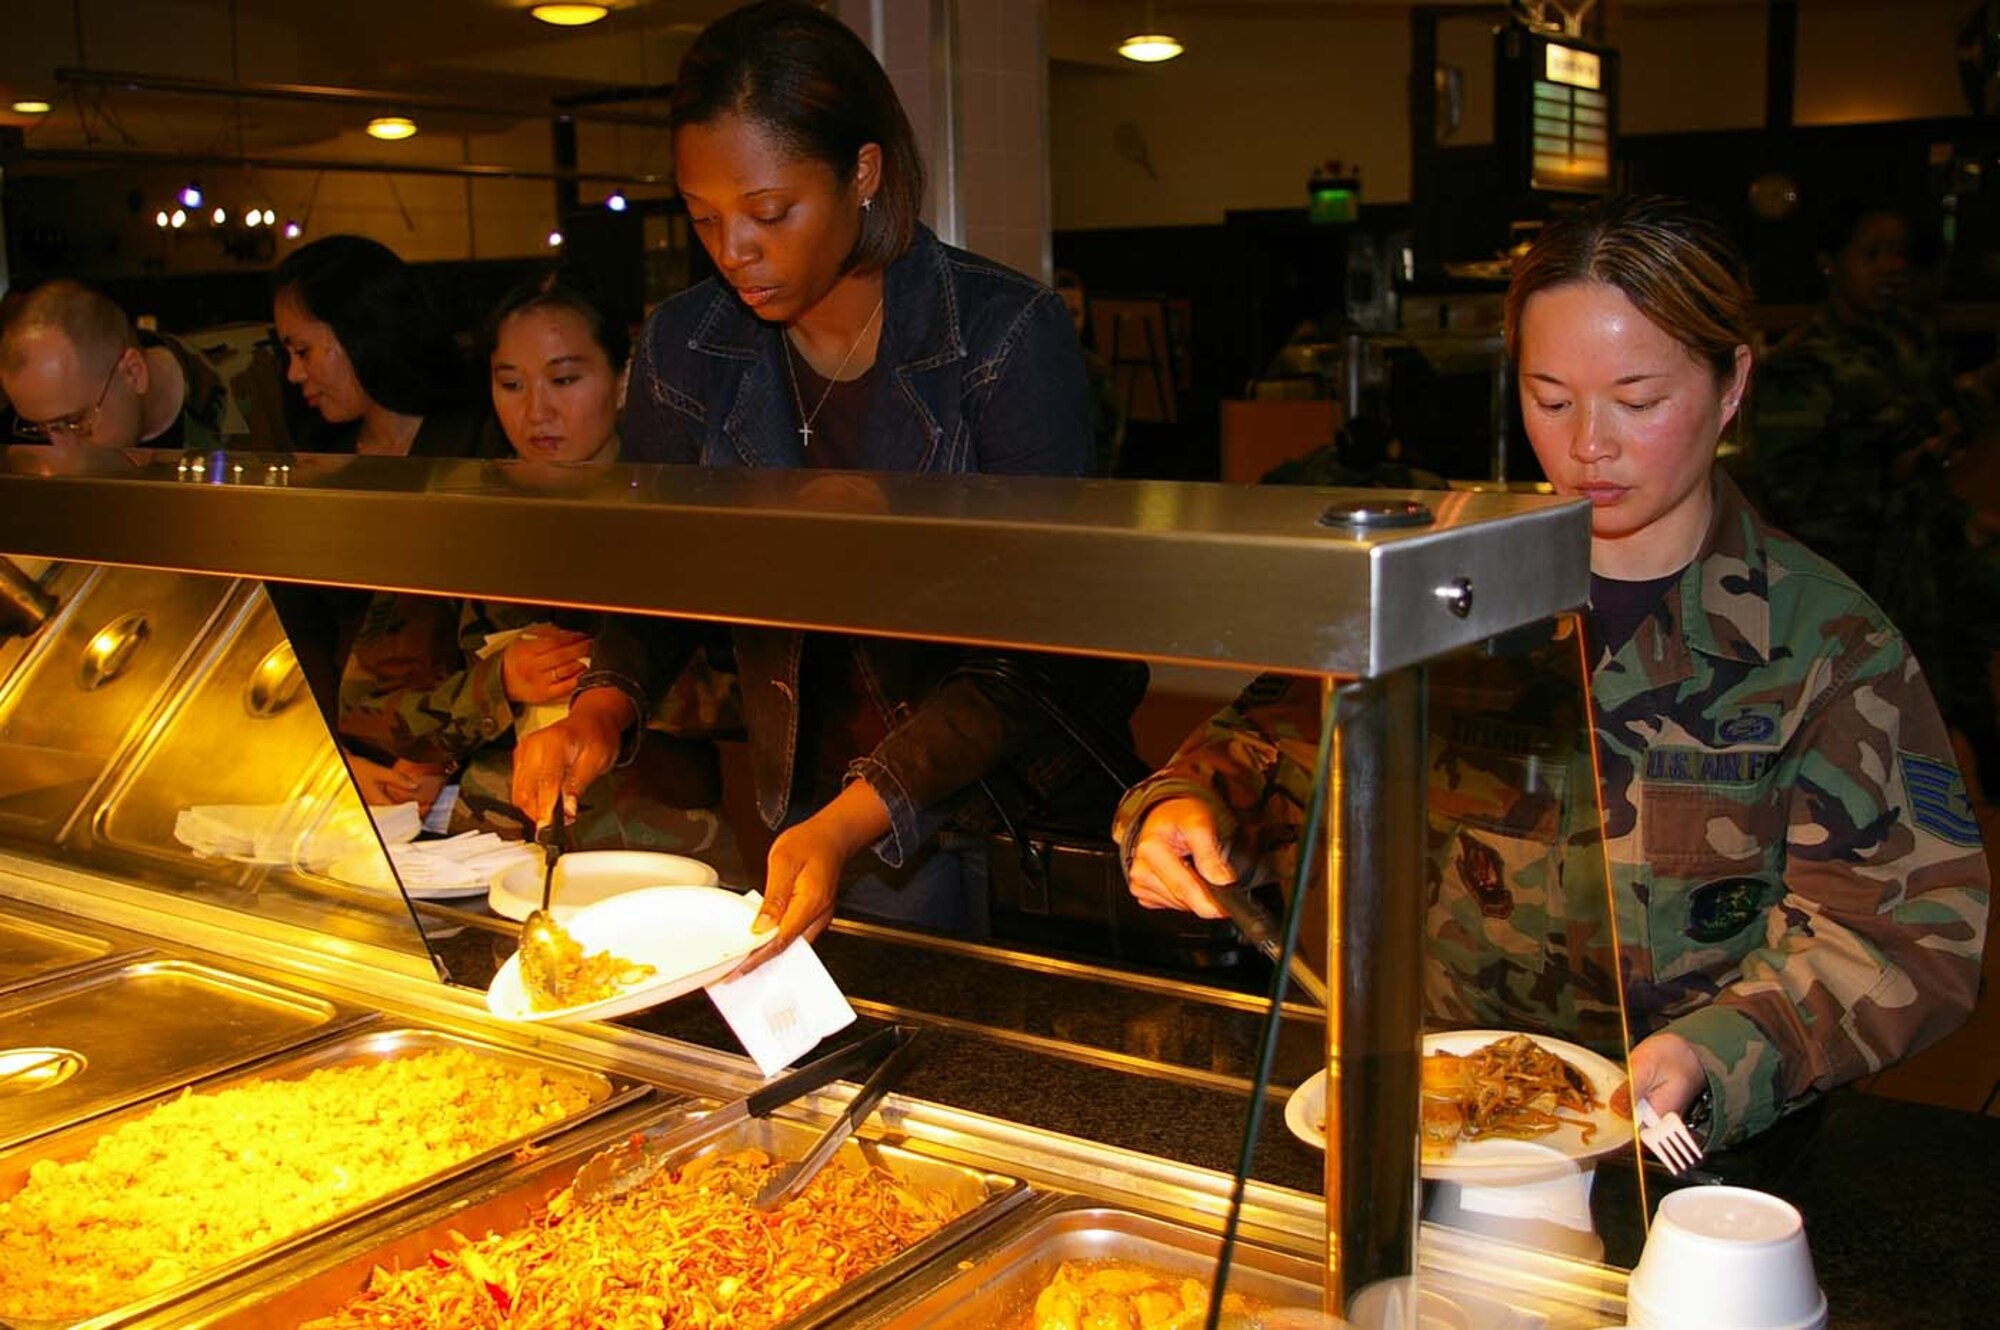 Tech. Sgt. Chi Trinh, 100th Civil Engineer Squadron, far right, and Charmaine Dunn, 501st Combat Support Wing, second right, sample food at the Gateway Dining Facility May 4 after the Asian-Pacific Heritage Month cooking demonstration. (U.S. Air Force photo by Karen Abeyasekere)